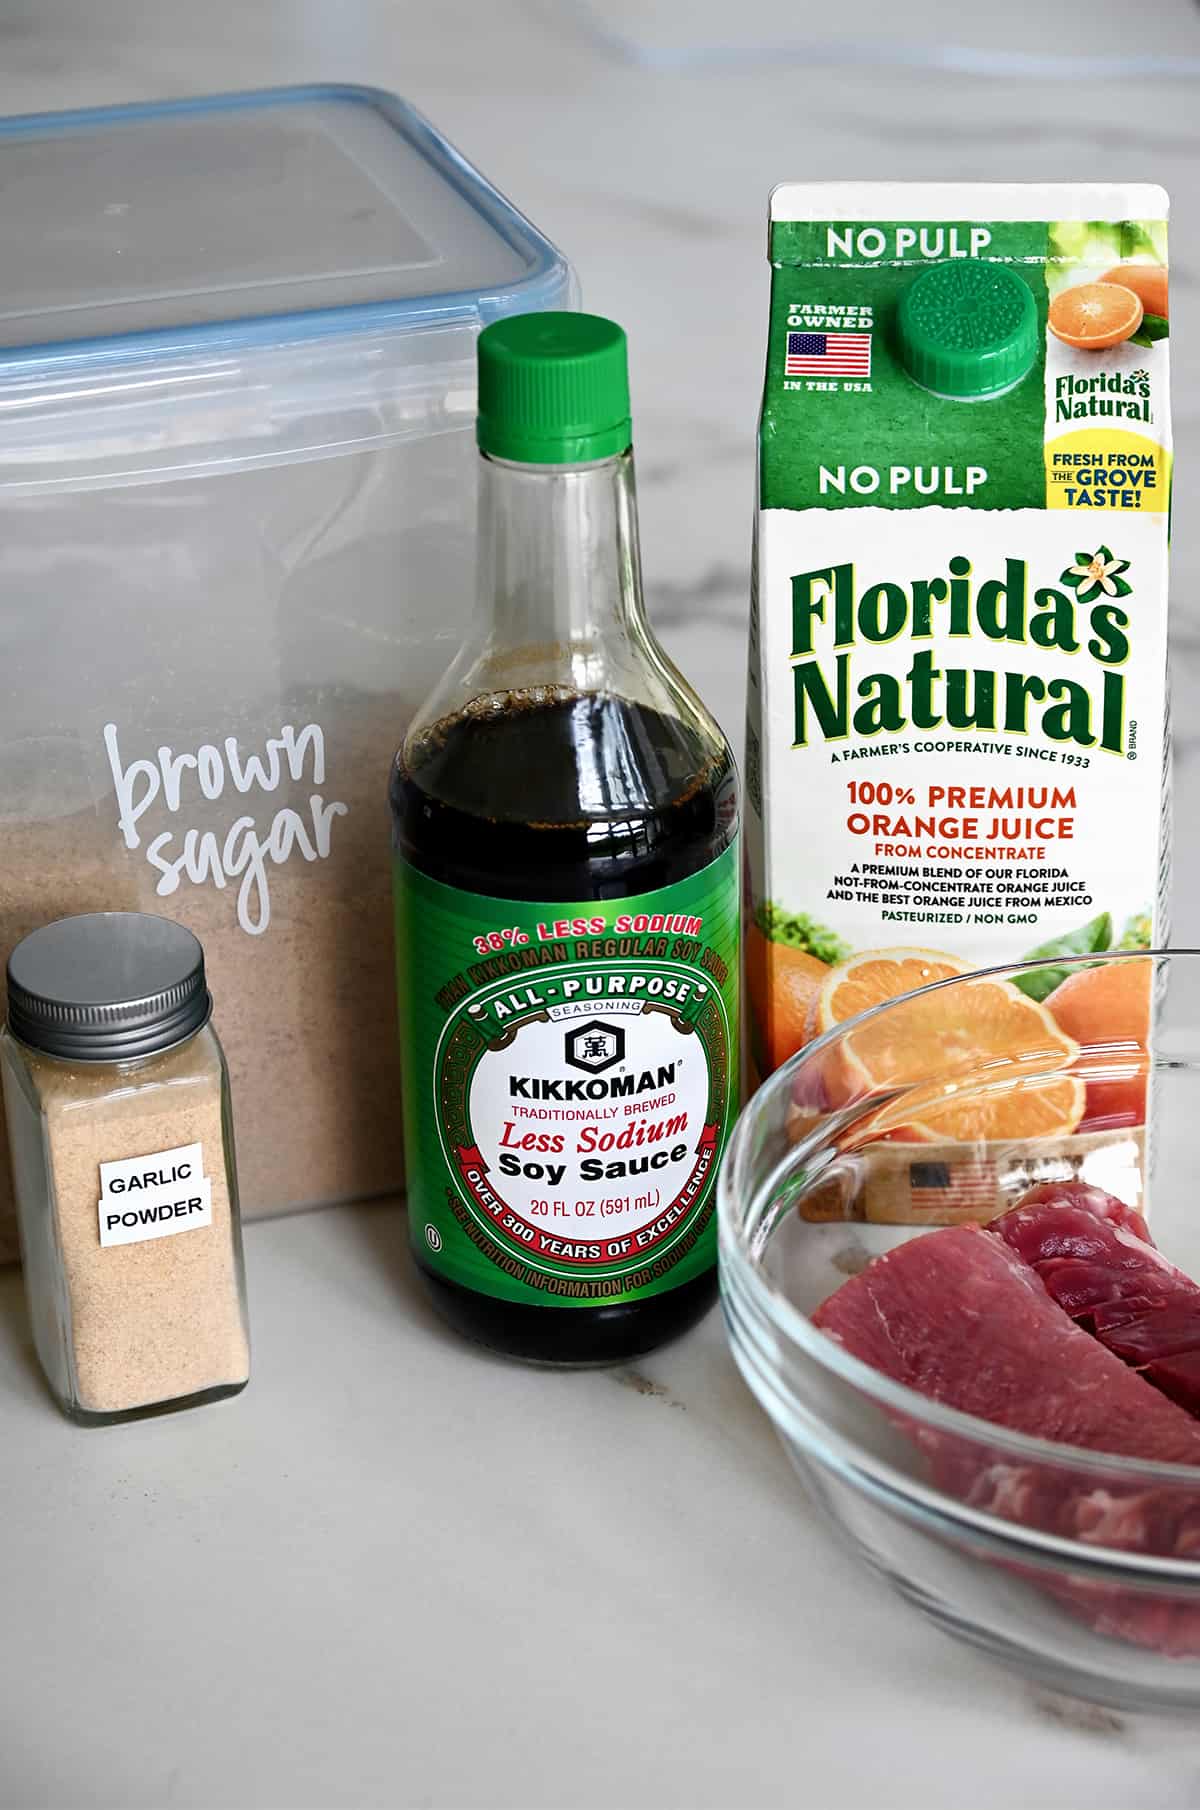 A small jar containing garlic powder next to a plastic container with brown sugar, a bottle of low sodium soy sauce, a carton of Florida's Natural orange juice and a clear bowl with raw pork tenderloin.